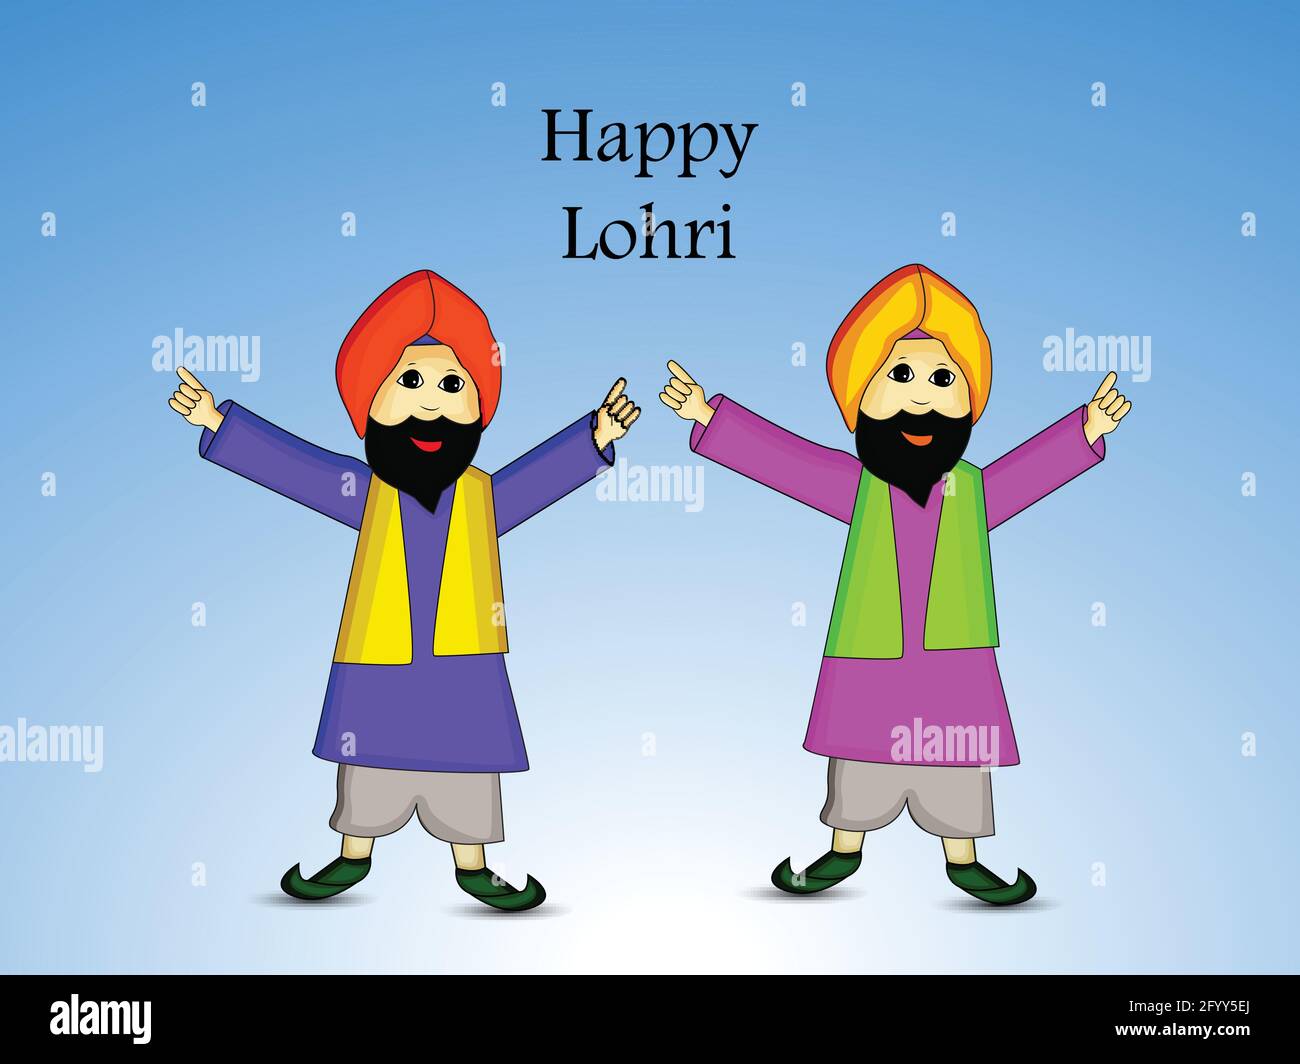 Lohri Stock Vector Images - Page 3 - Alamy